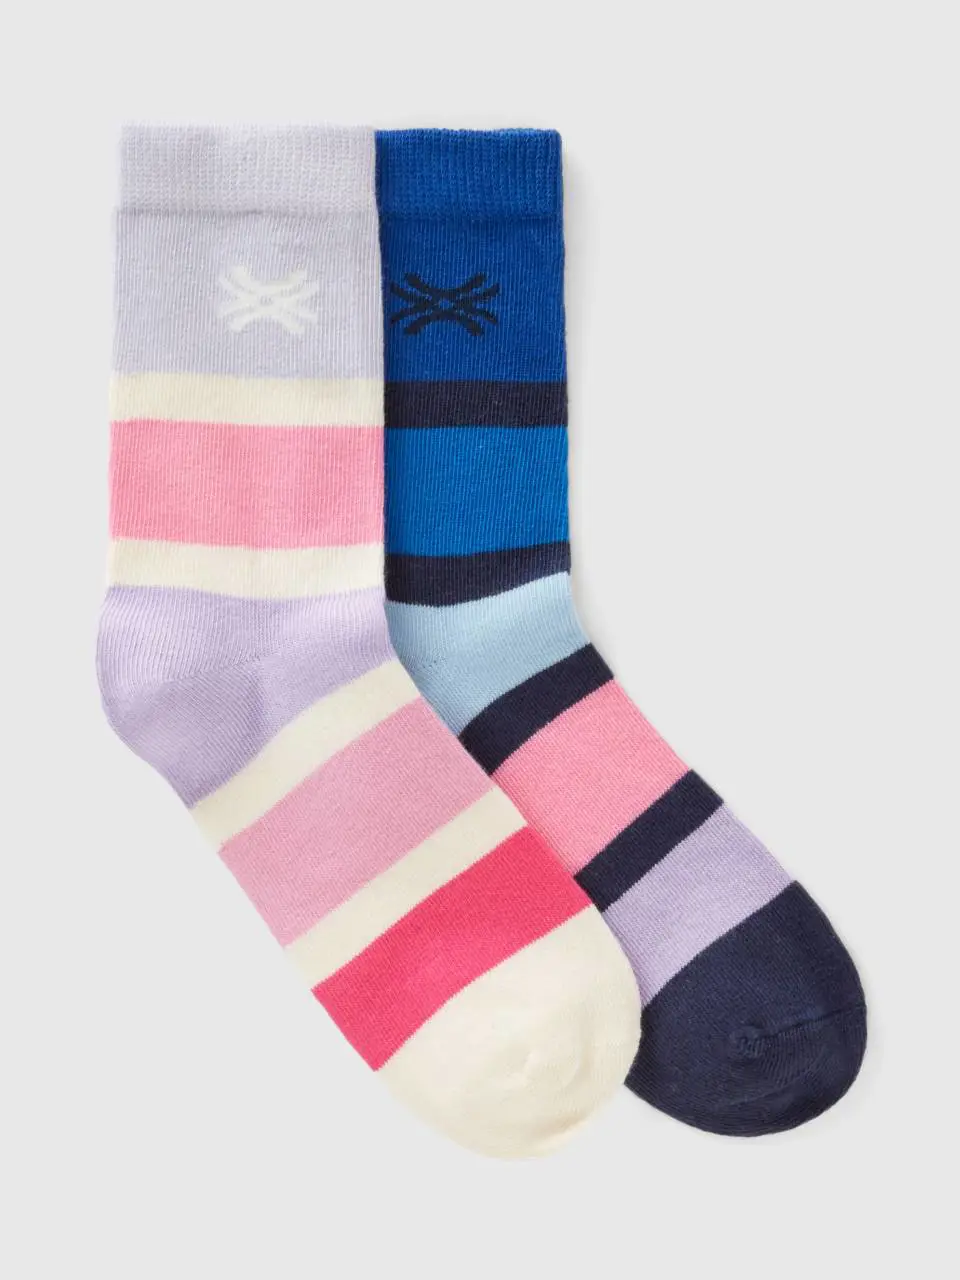 Benetton two pairs of striped socks. 1